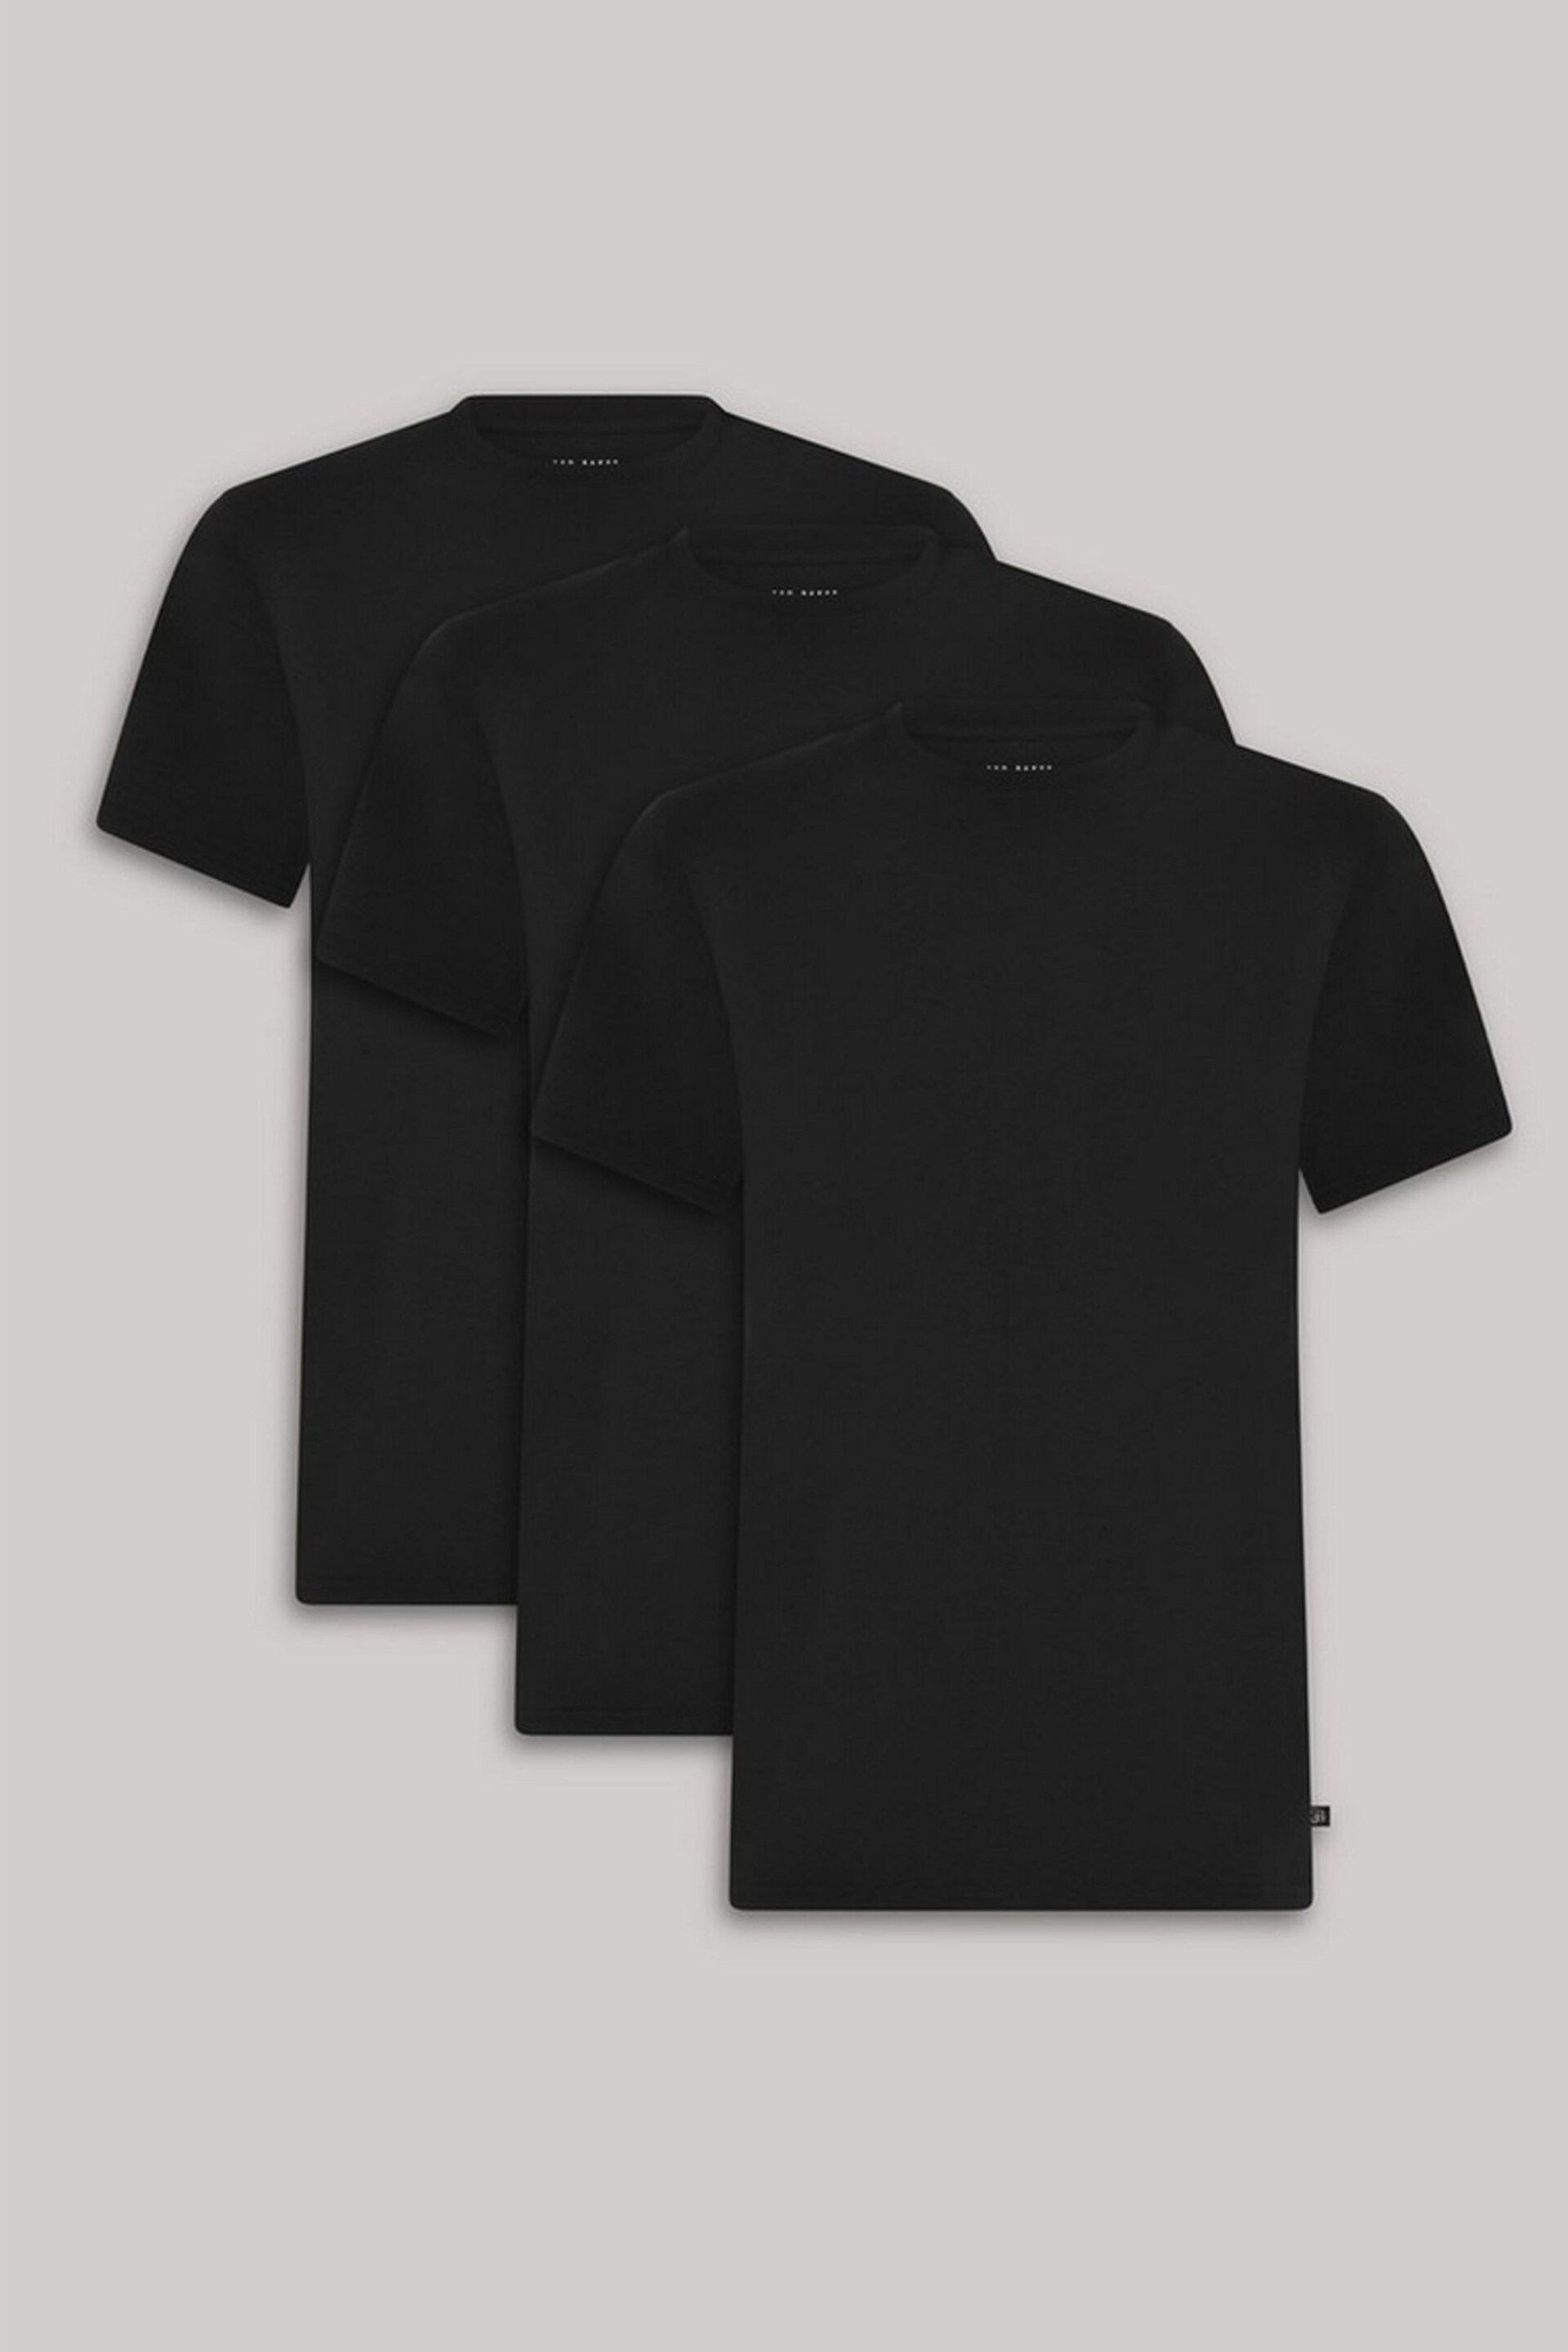 Ted Baker Black Crew Neck T-Shirts 3 Pack - Image 2 of 3